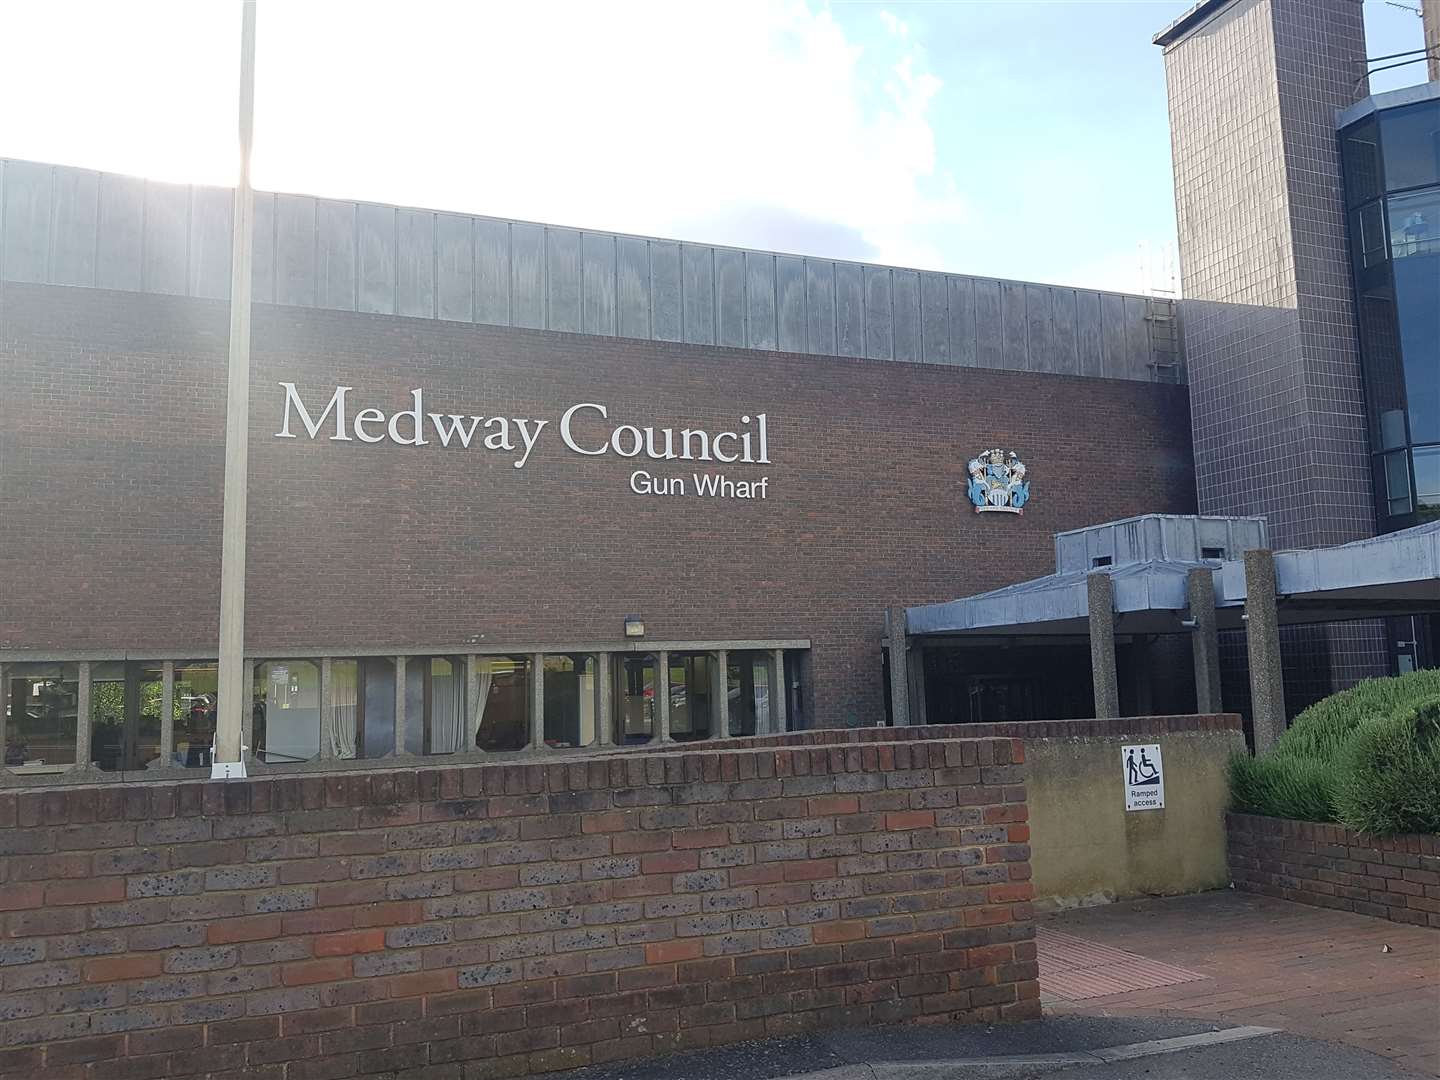 Gun Wharf is the home of Medway Council.